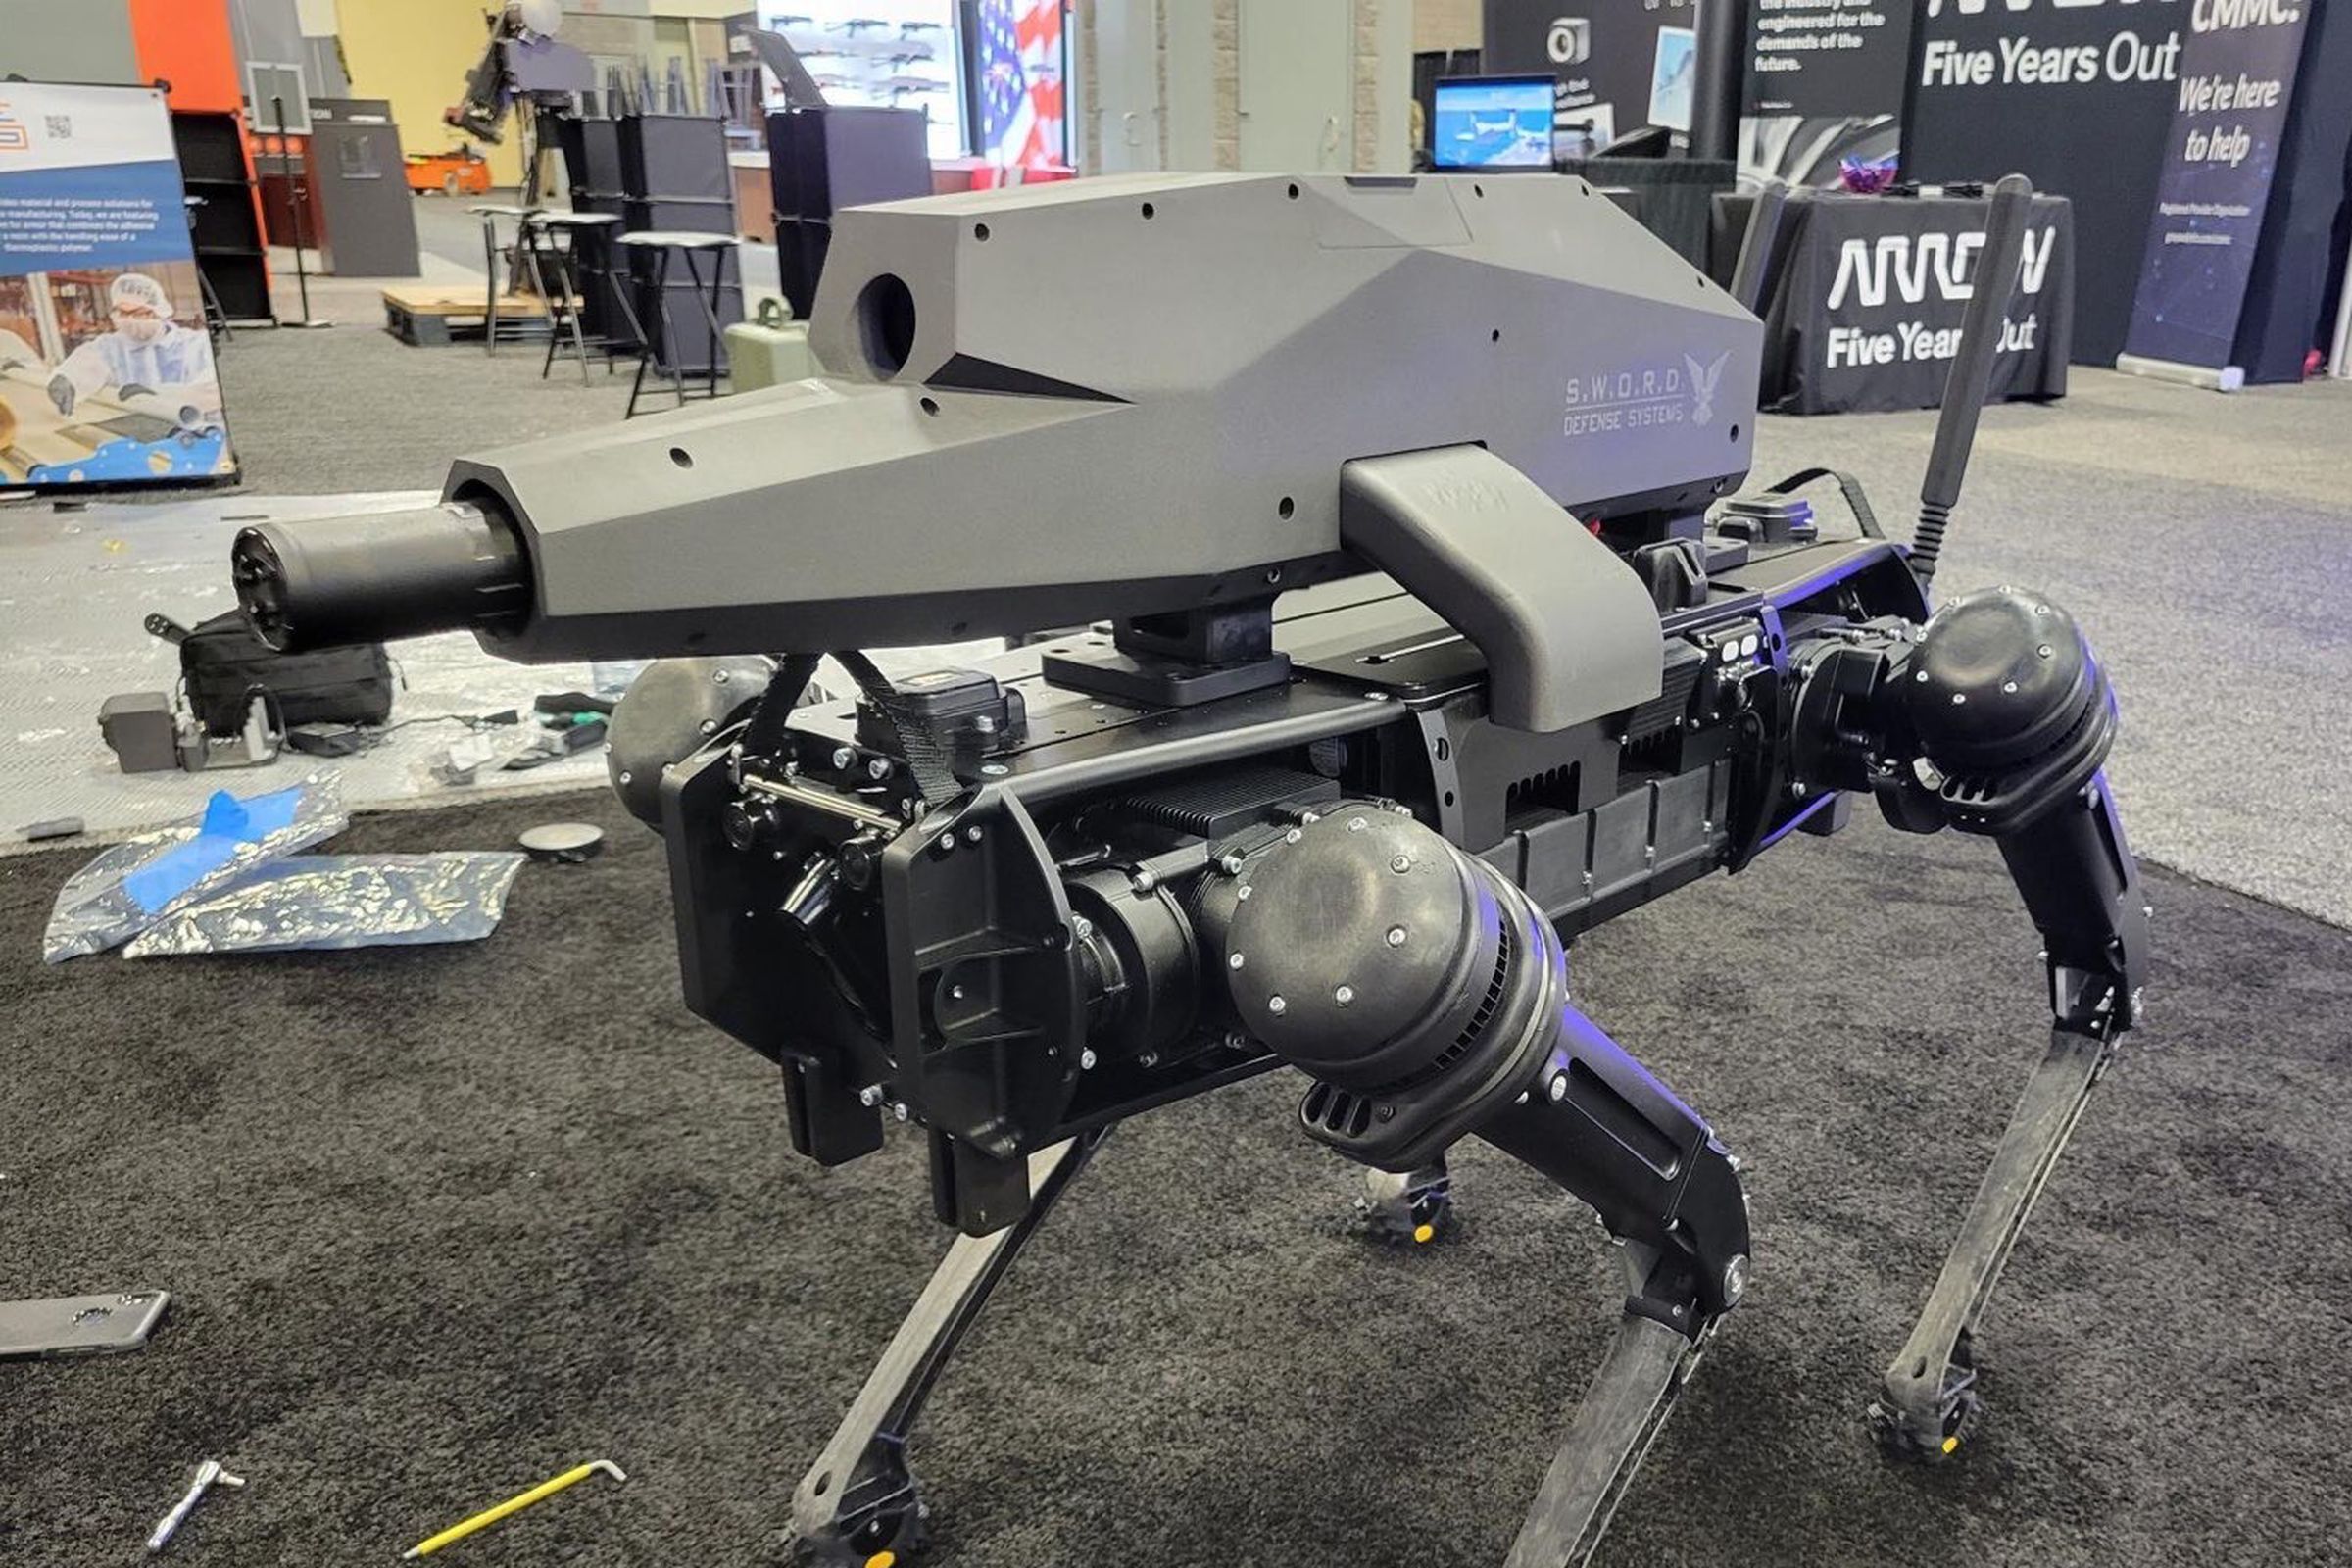 It’s not clear if this gun-equipped quadrupedal robot is for sale, but it’s only a matter of time. 